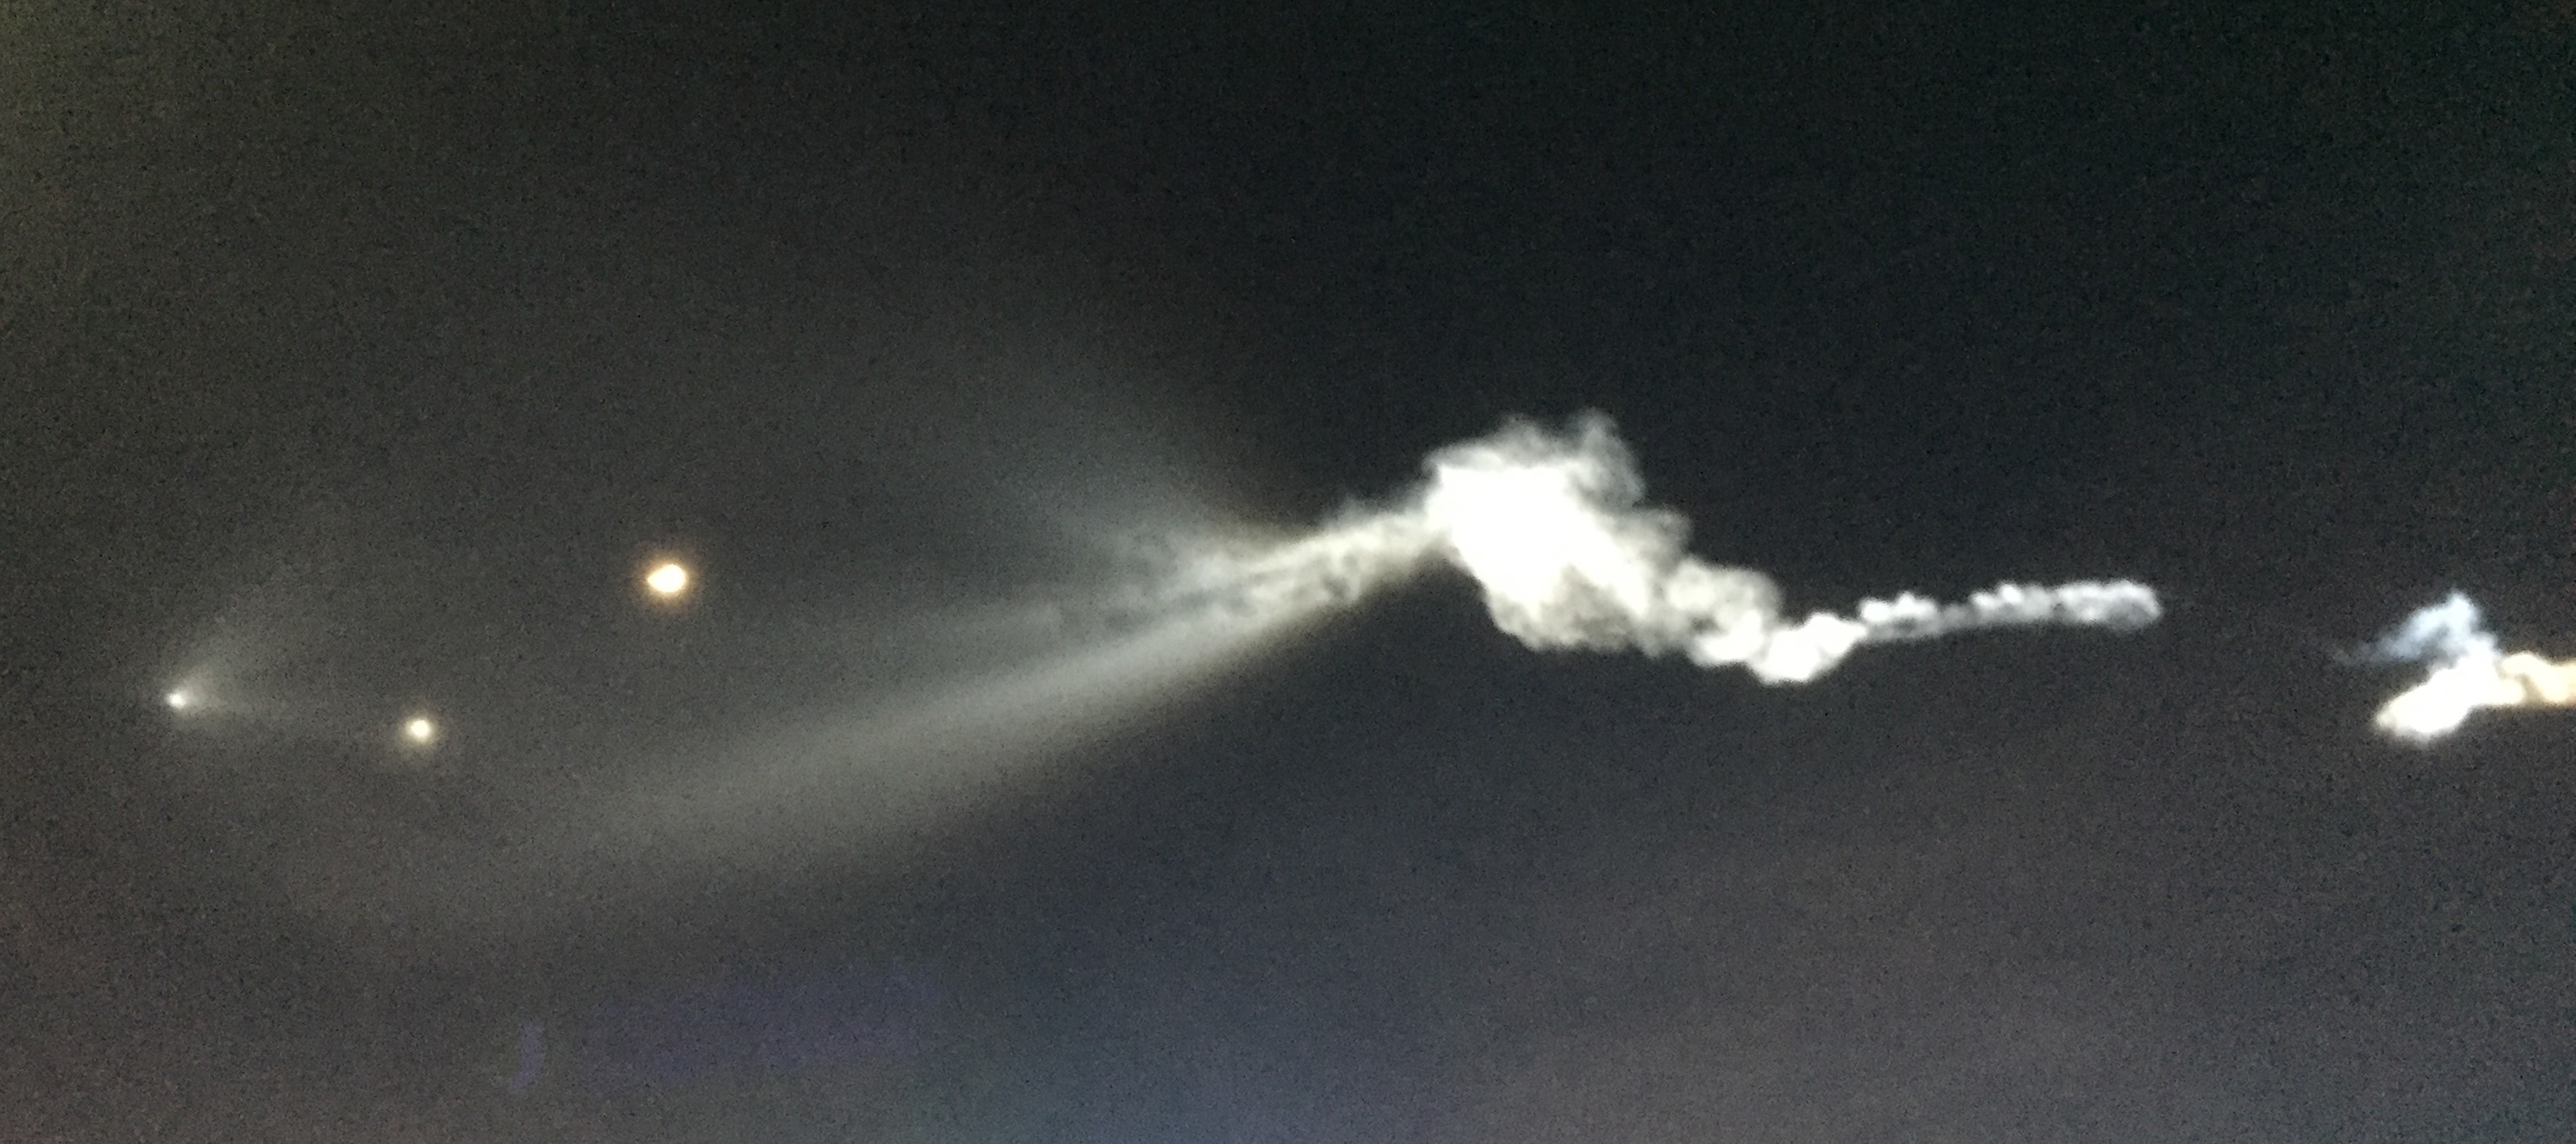 The Space X launch the 22nd was quite spectacular